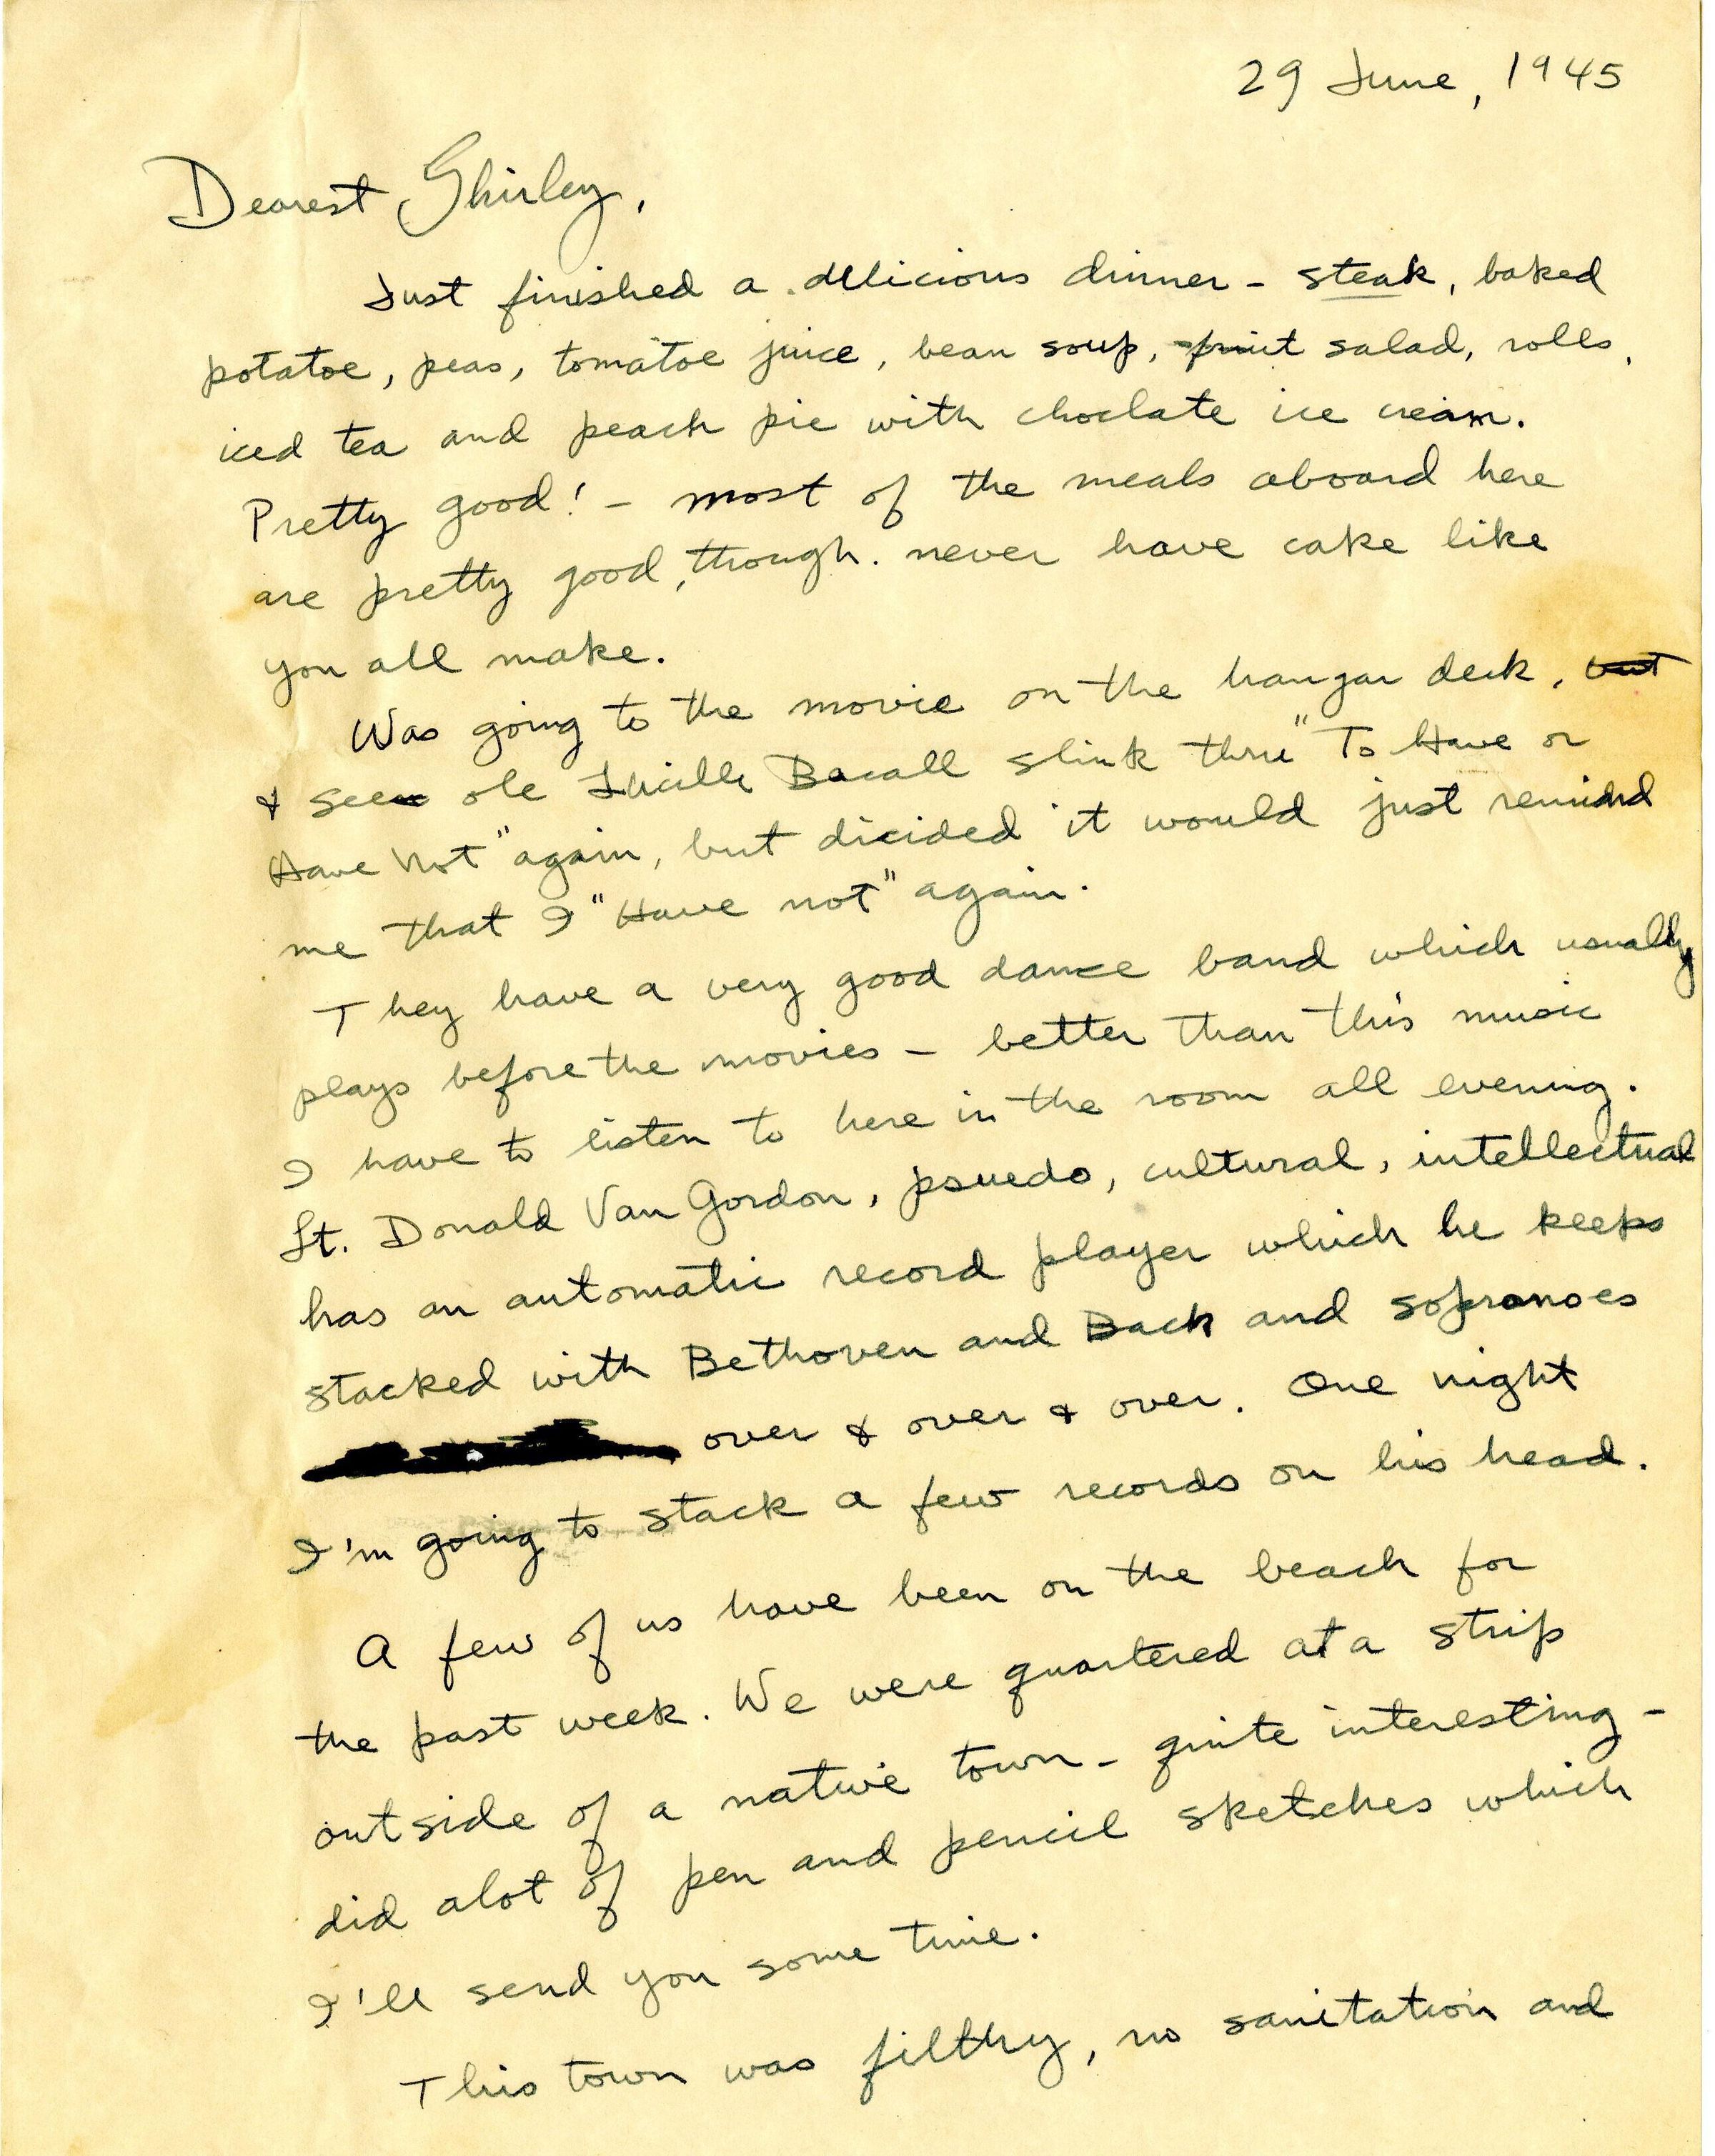 Primary Image of Letter from Lt. Gerald Hennesy to His Sister Dated June 29, 1945